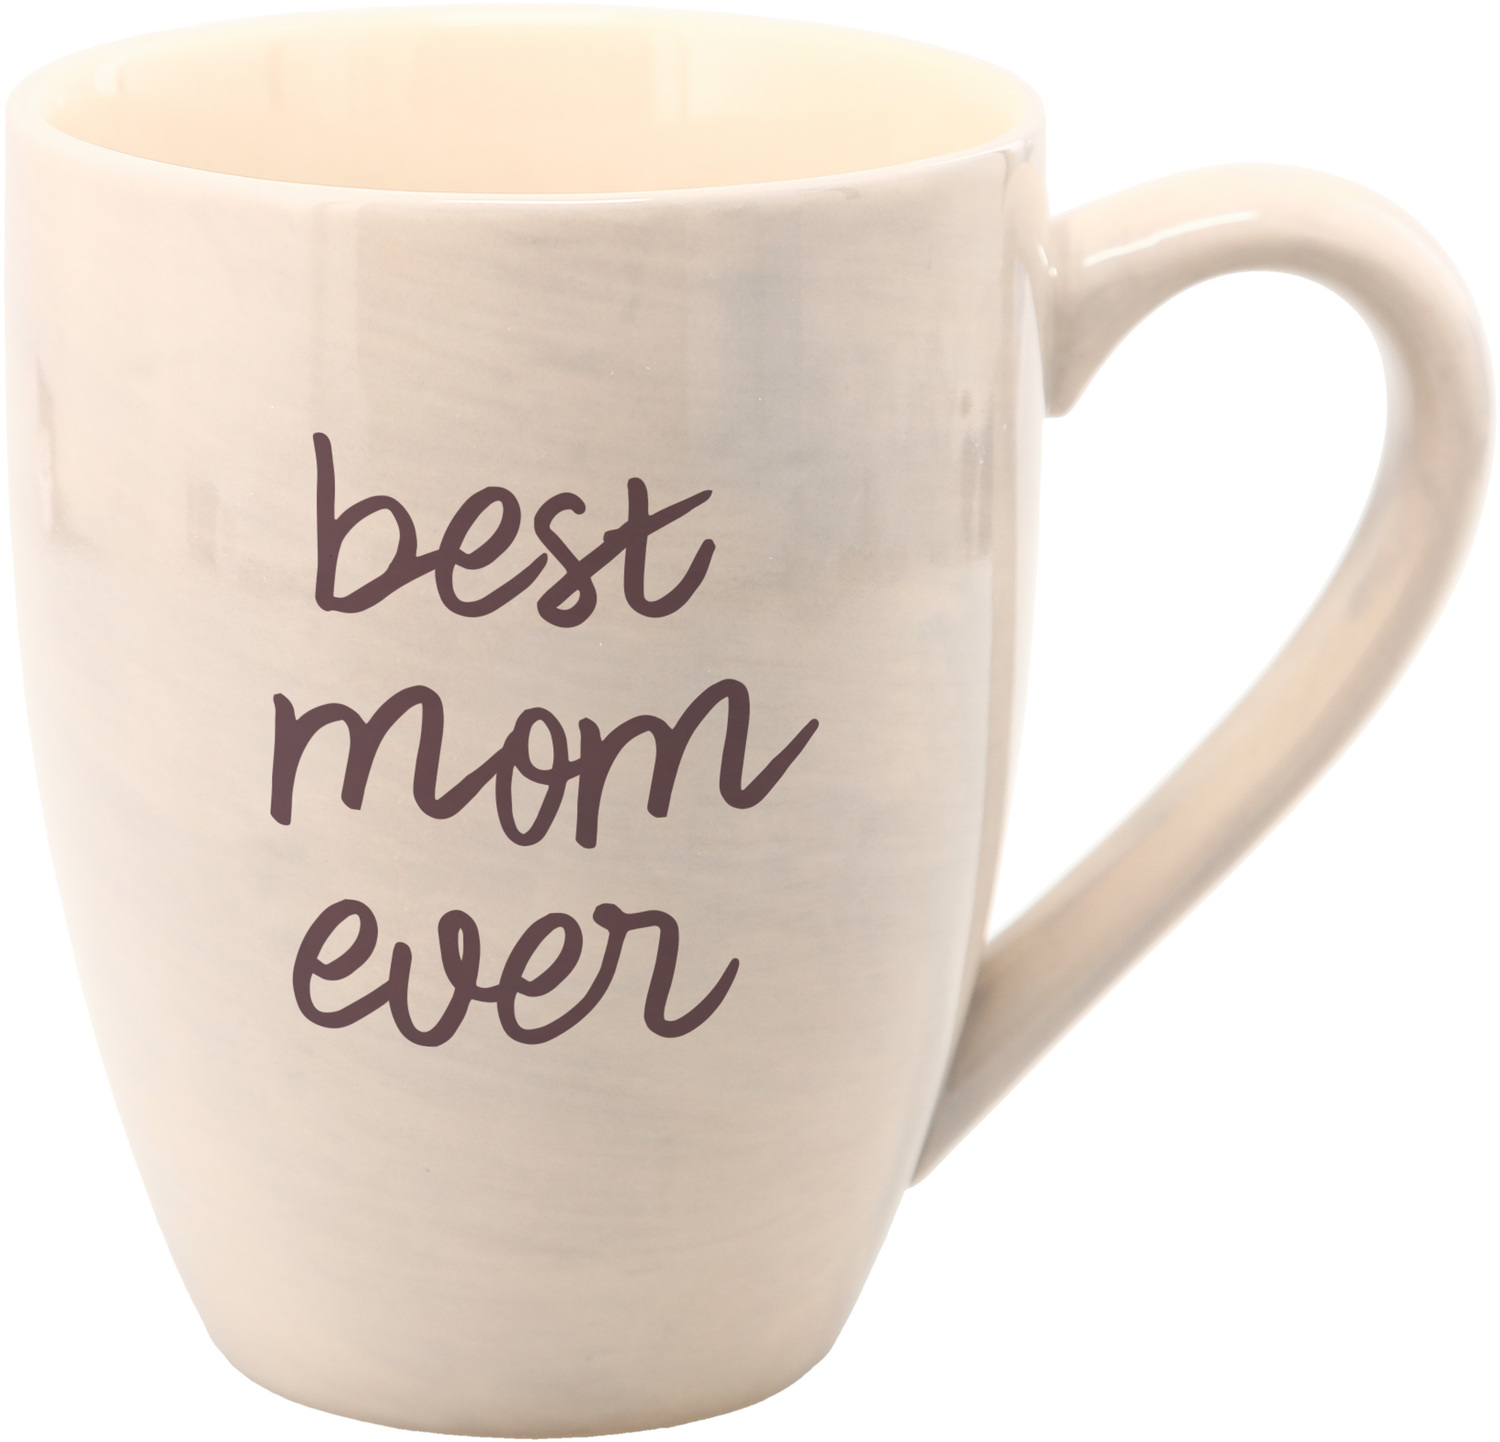 Best Mom Ever - 20oz Cup.